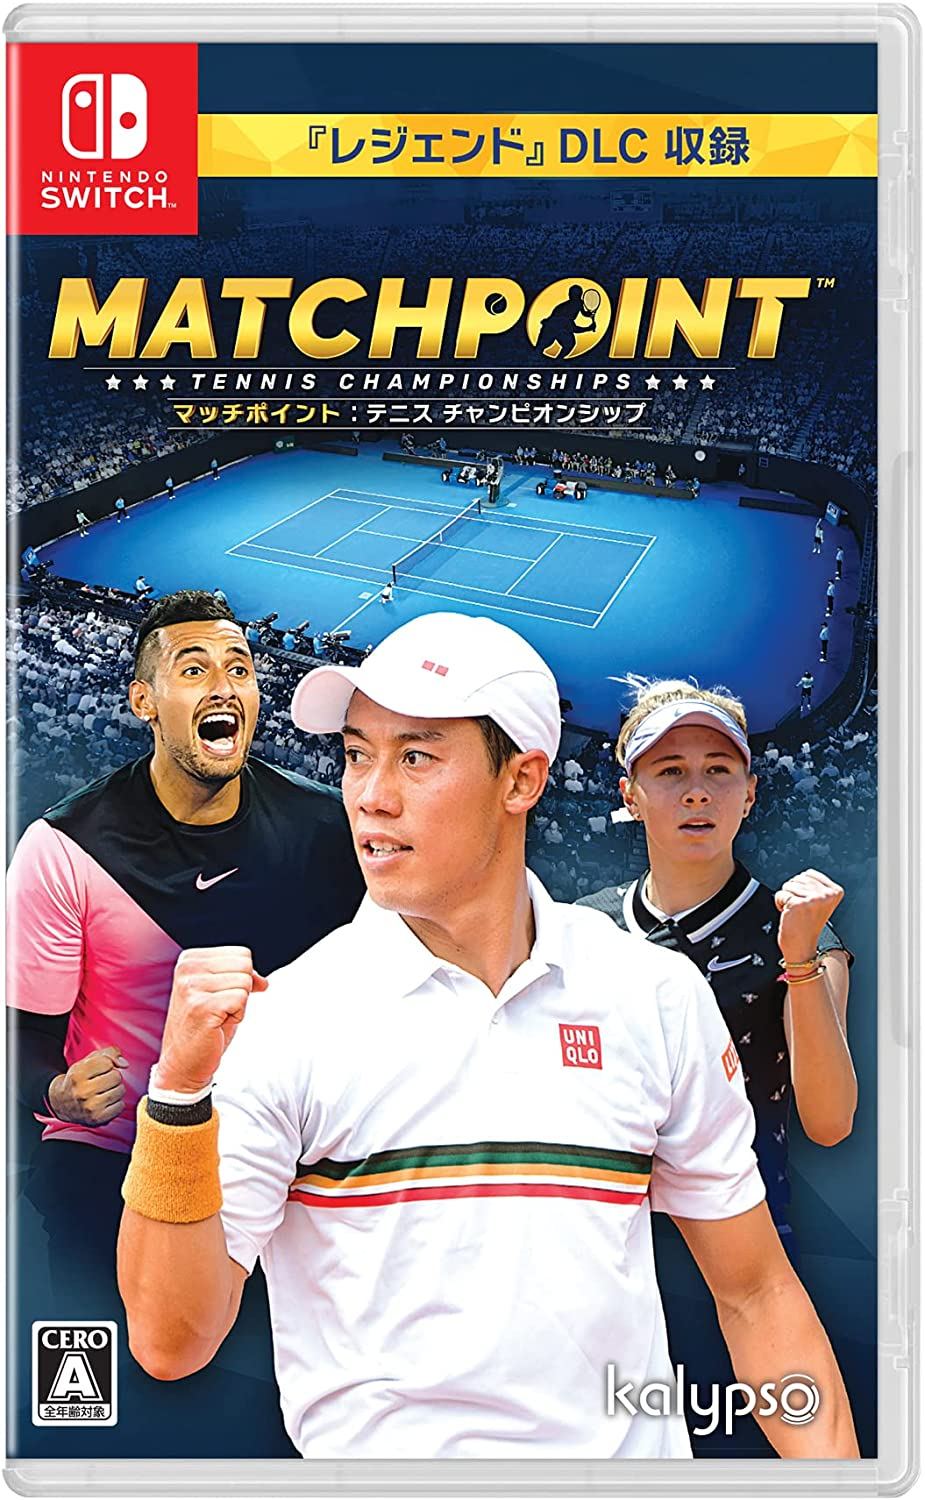 Matchpoint Tennis Championships (English) for Nintendo Switch